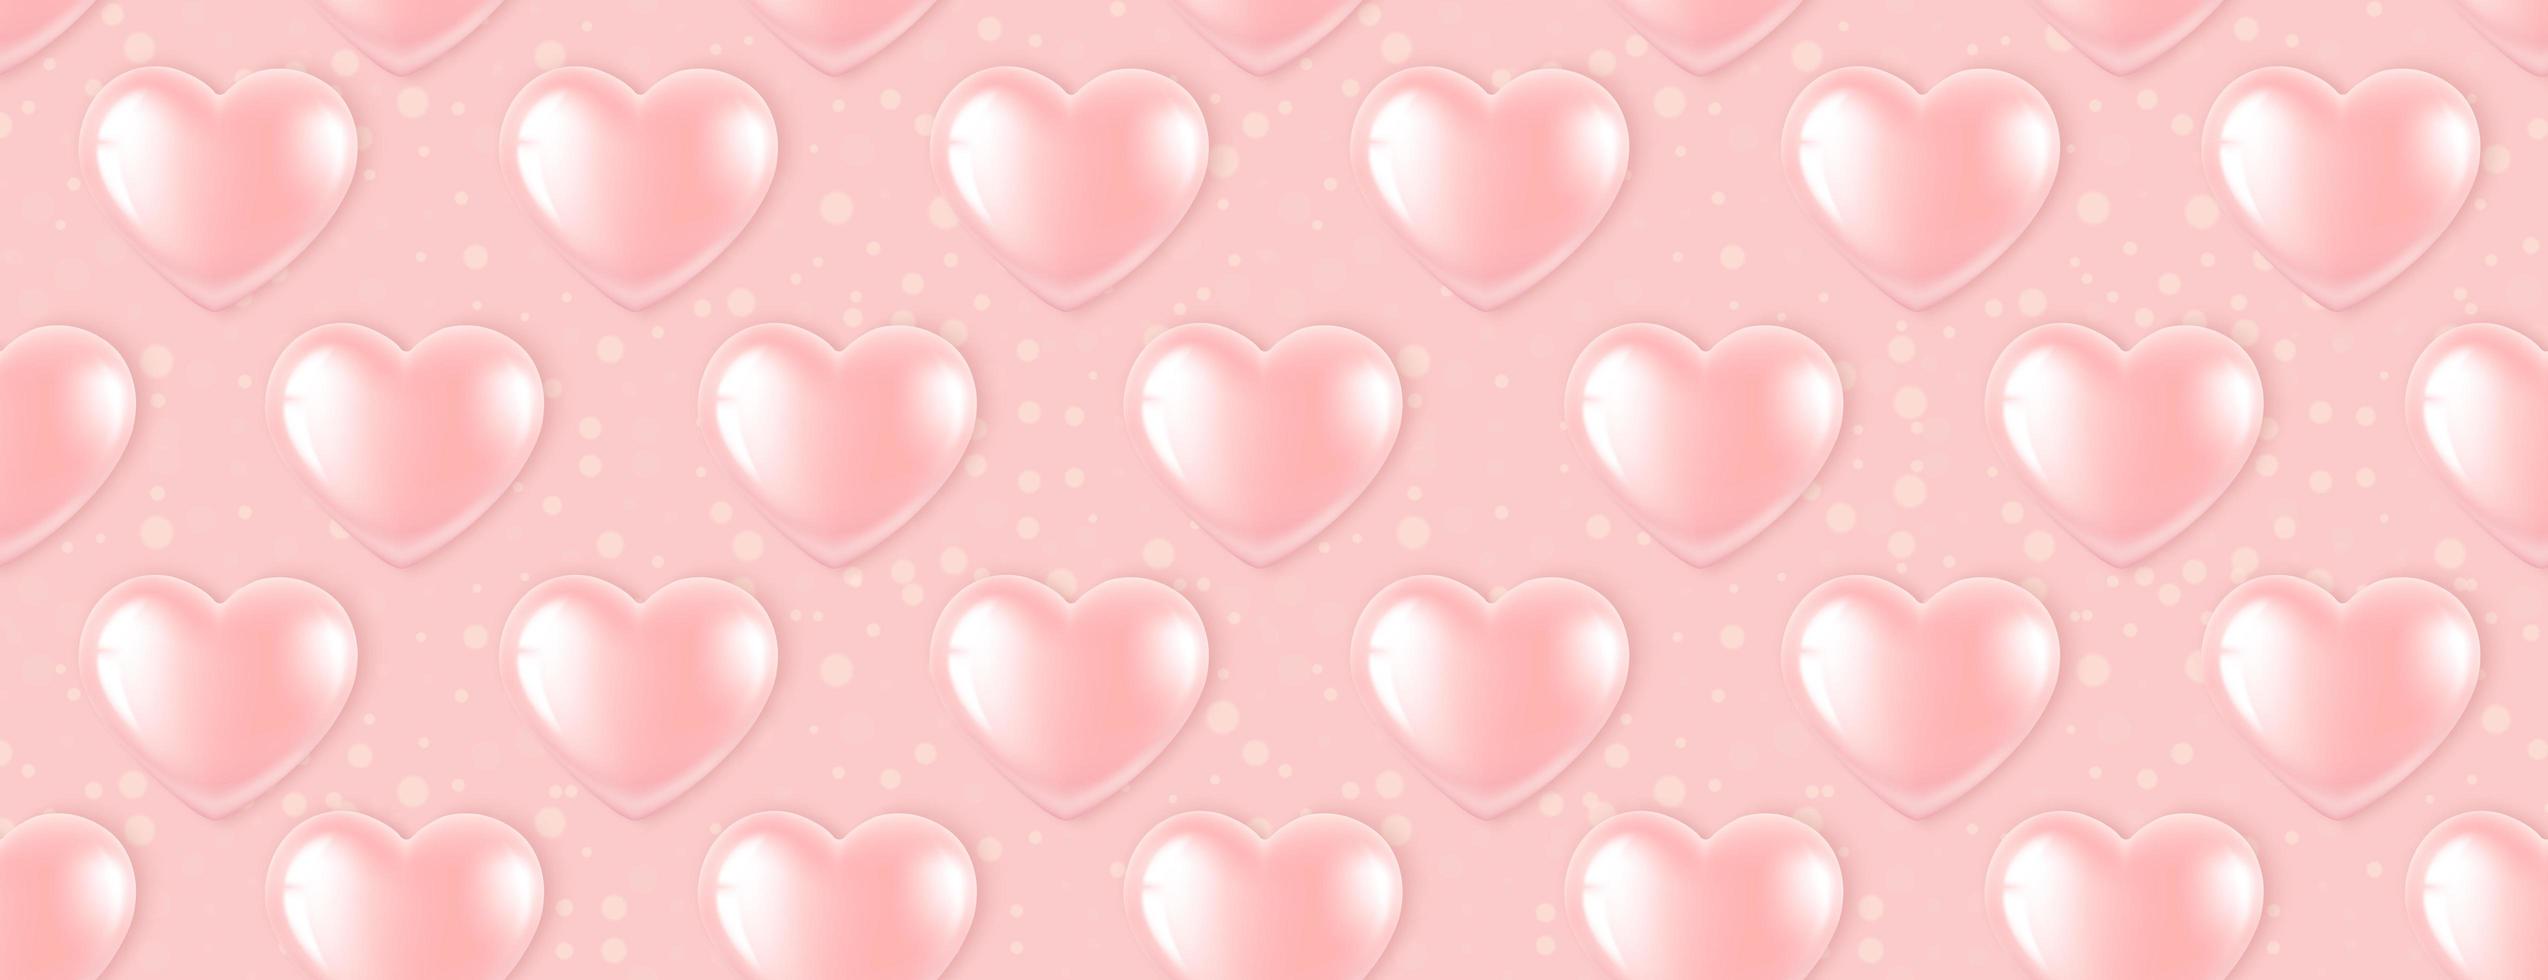 Seamless pattern with Pink Heart Balloons vector